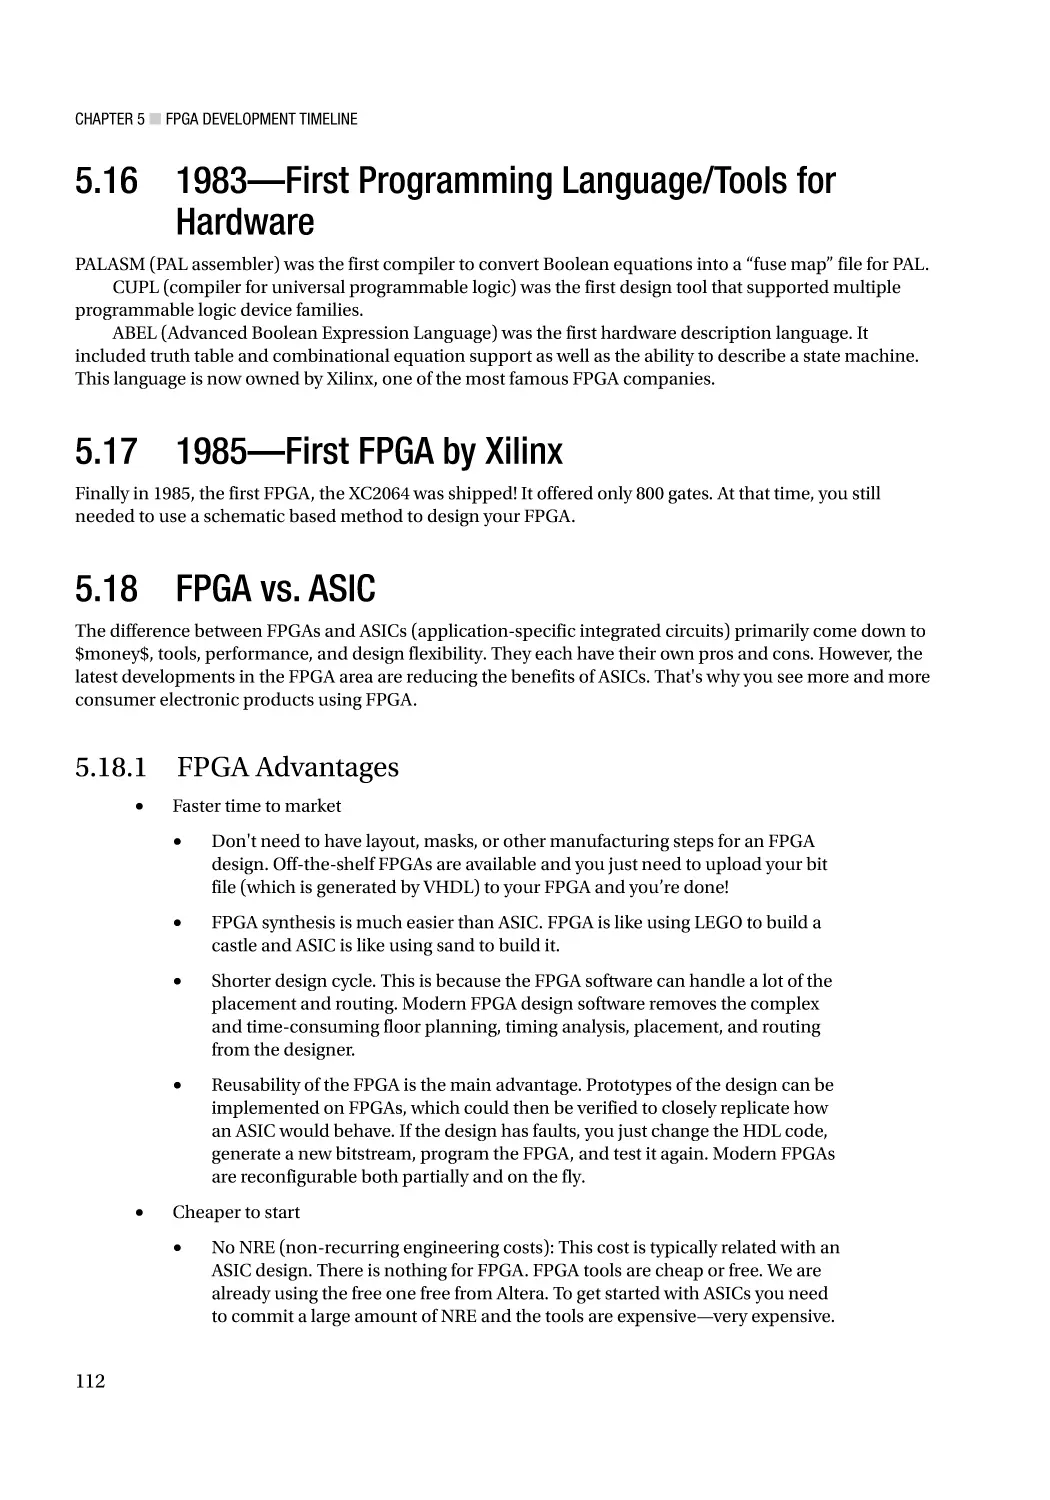 5.16 1983—First Programming Language/Tools for Hardware
5.17 1985—First FPGA by Xilinx
5.18 FPGA vs. ASIC
5.18.1 FPGA Advantages